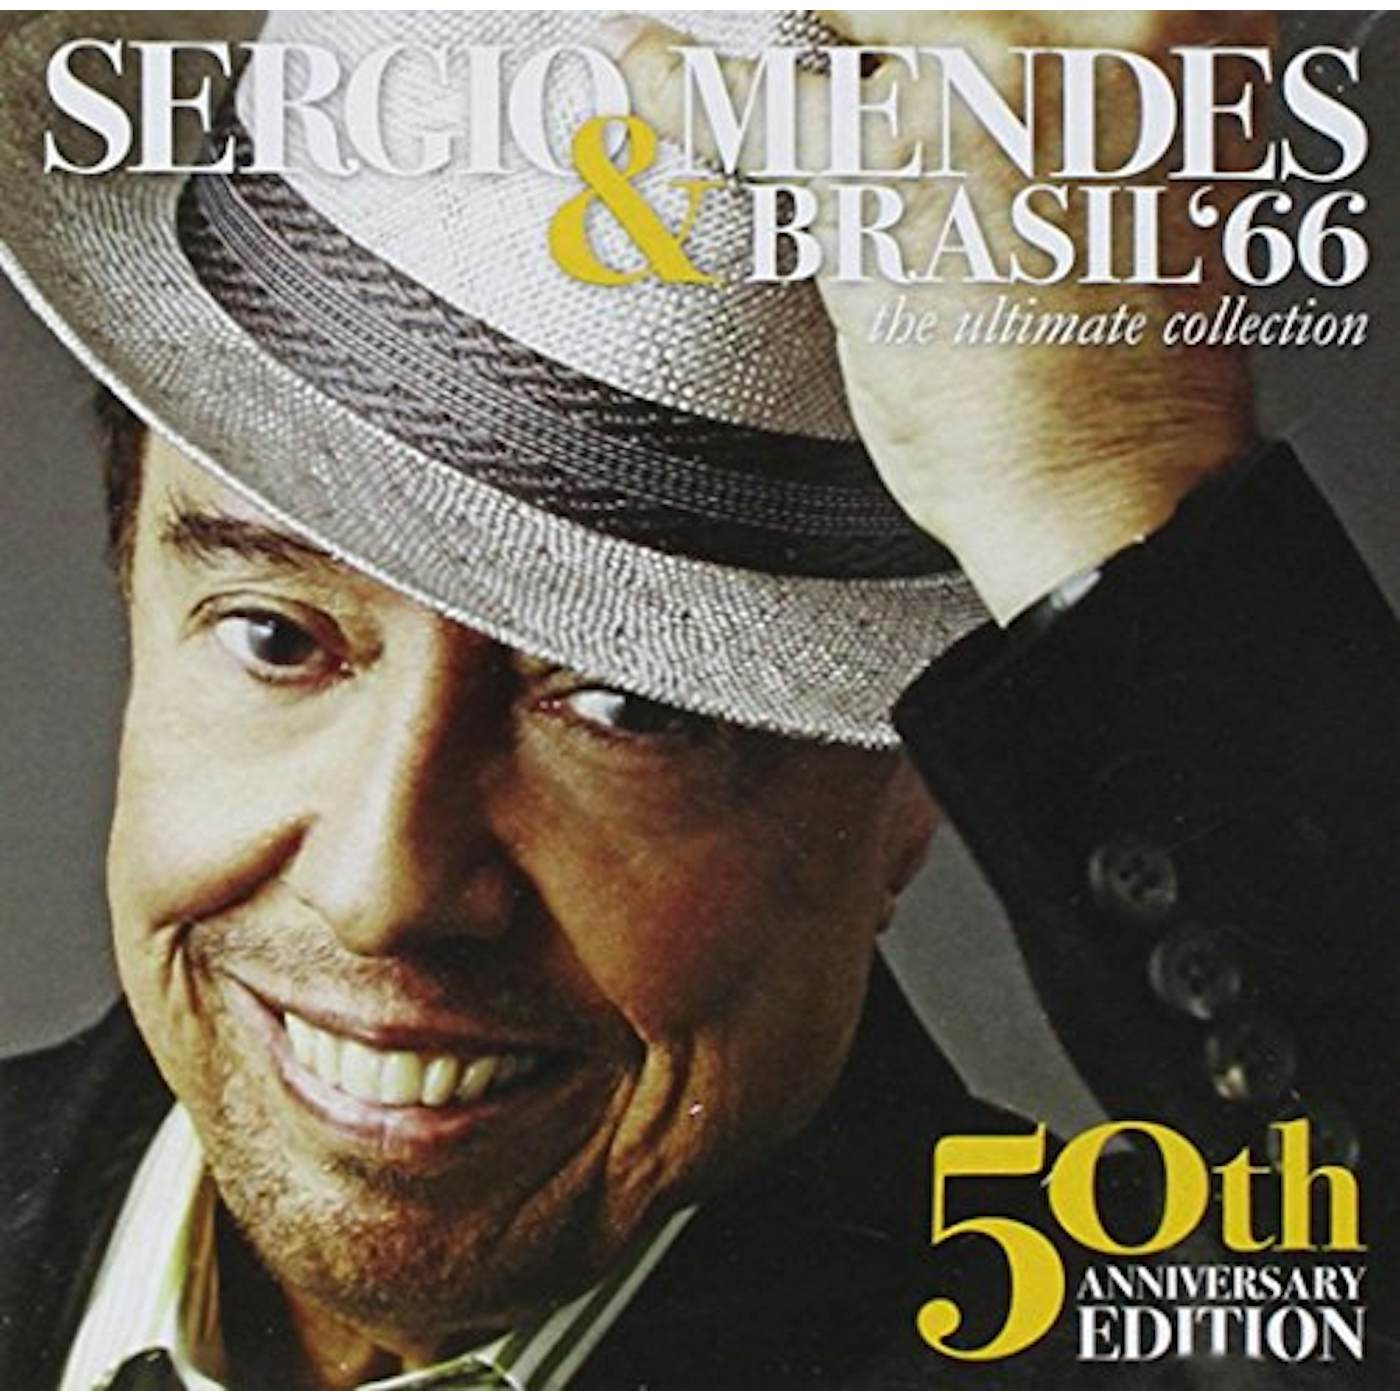 Sergio Mendes & Brasil '66 ULTIMATE COLLECTION: 50TH ANNIVERSARY EDITION CD